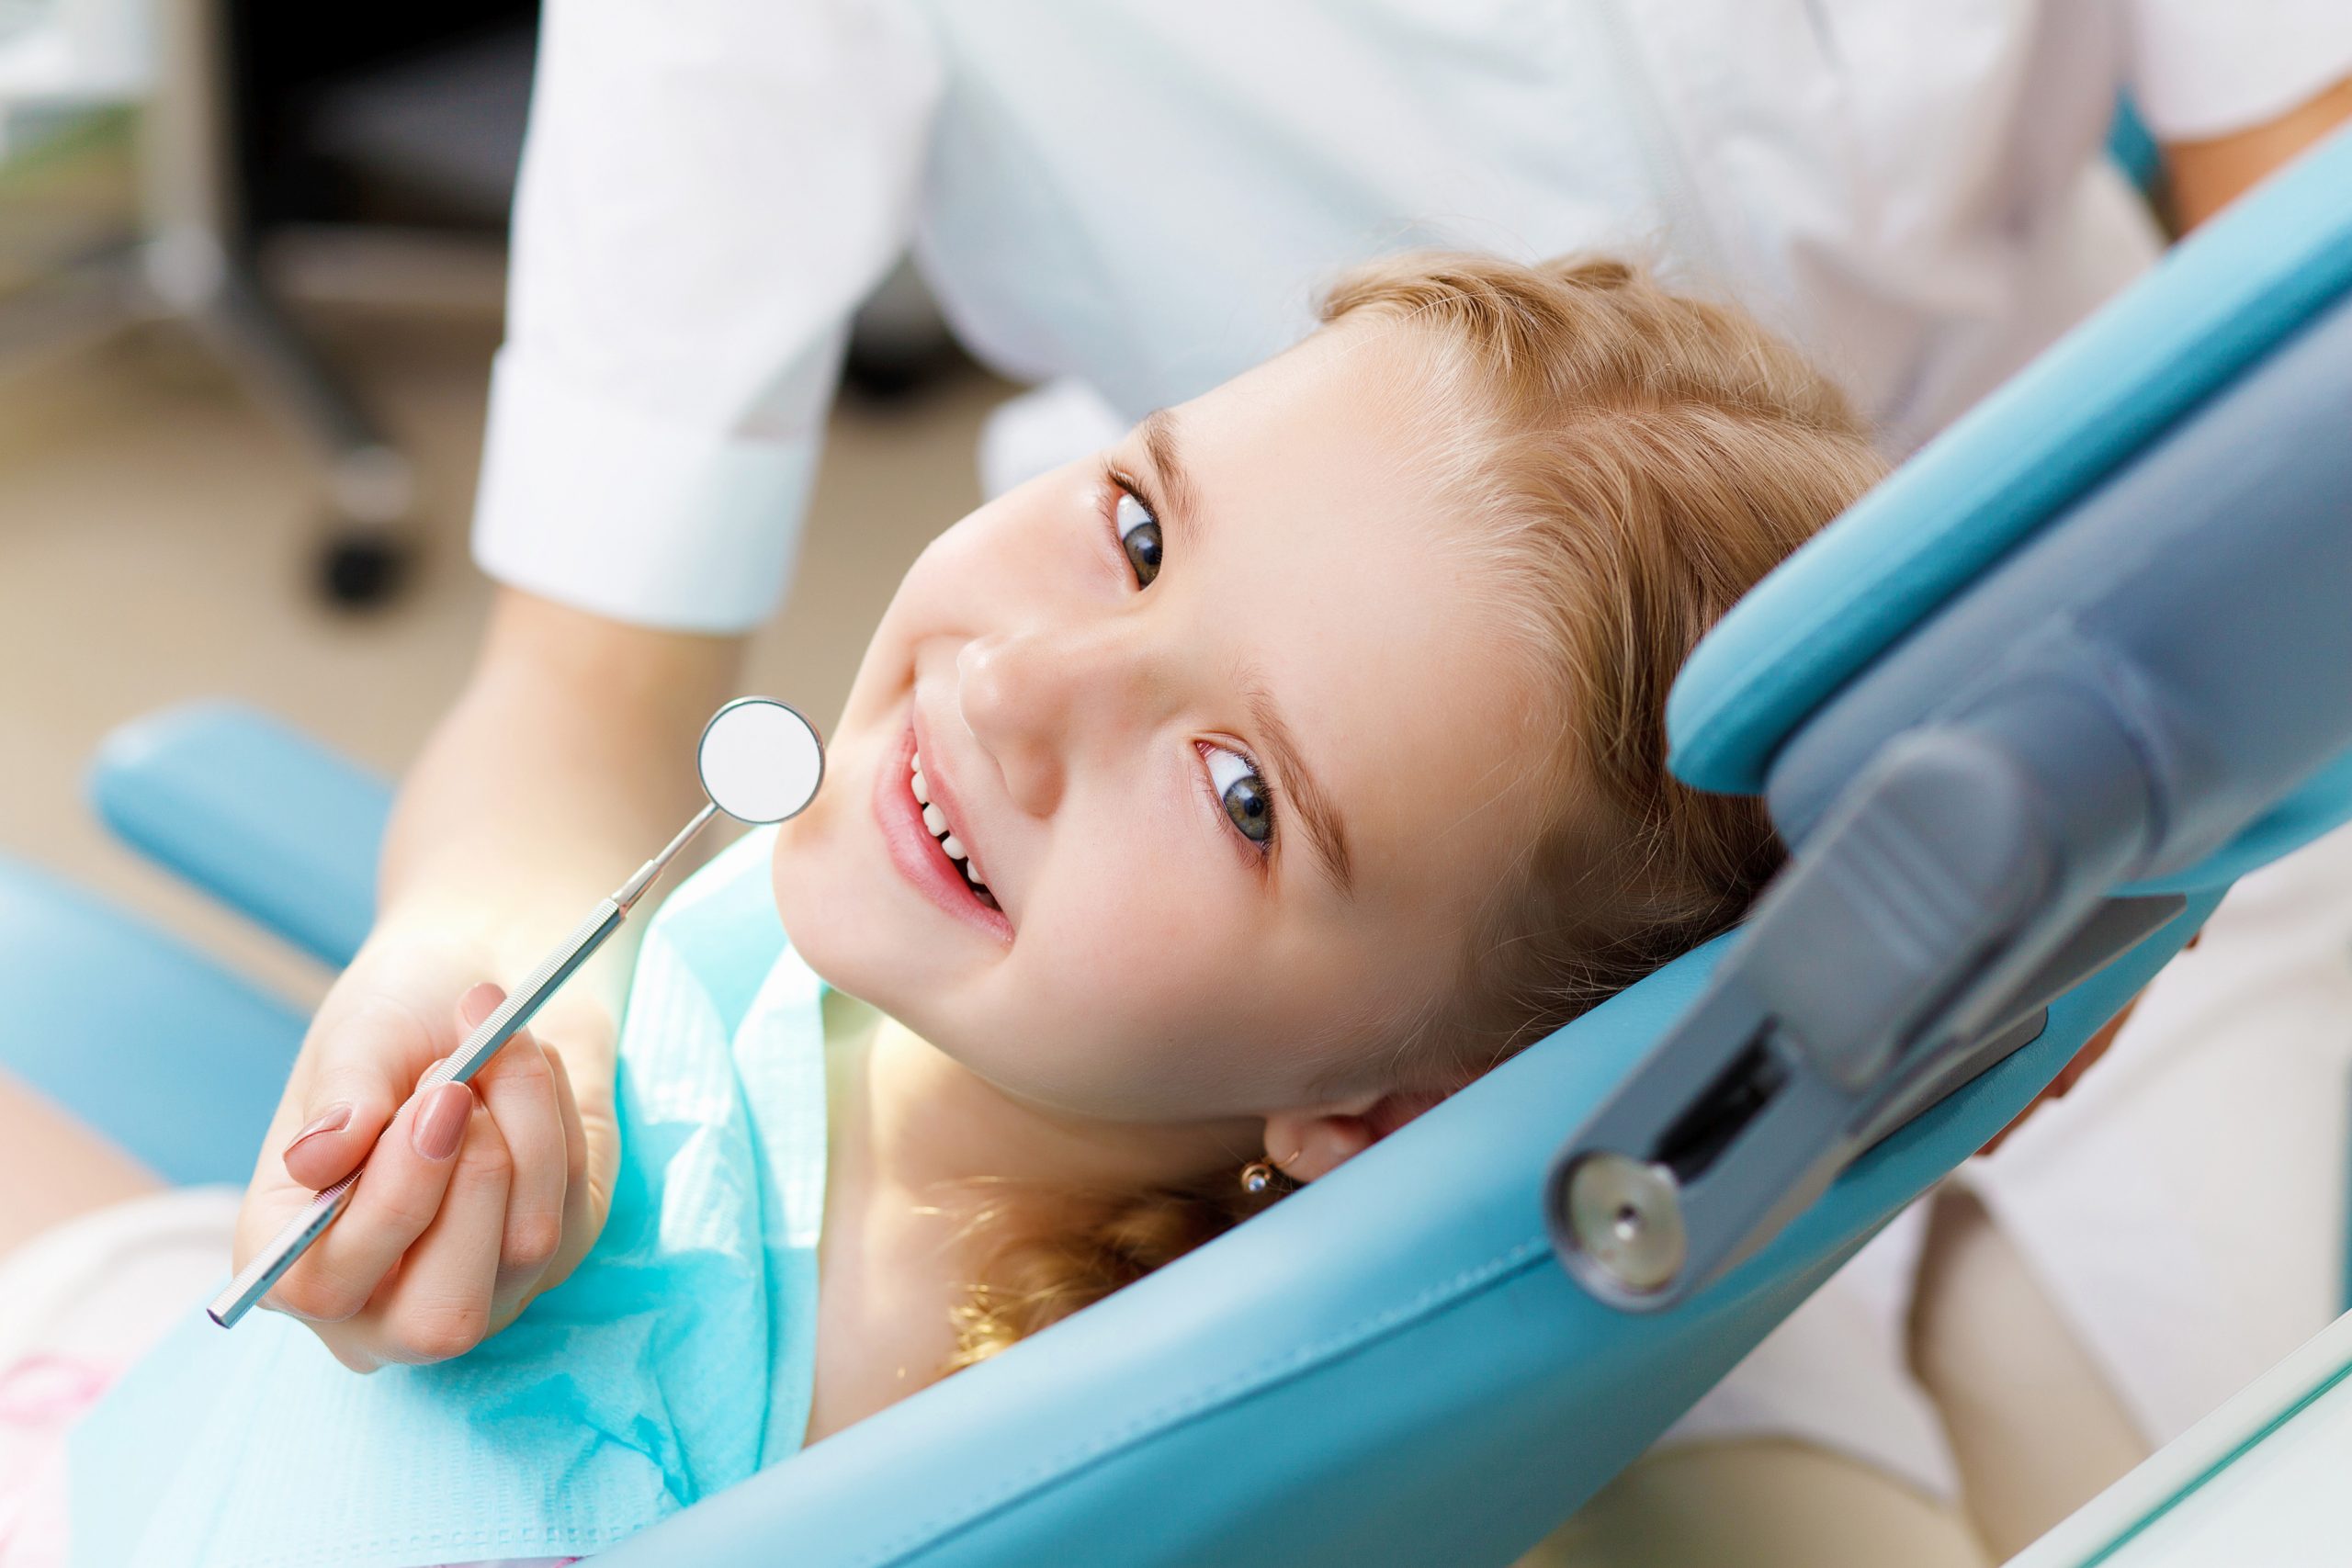 How to talk to children about visiting a Dentist